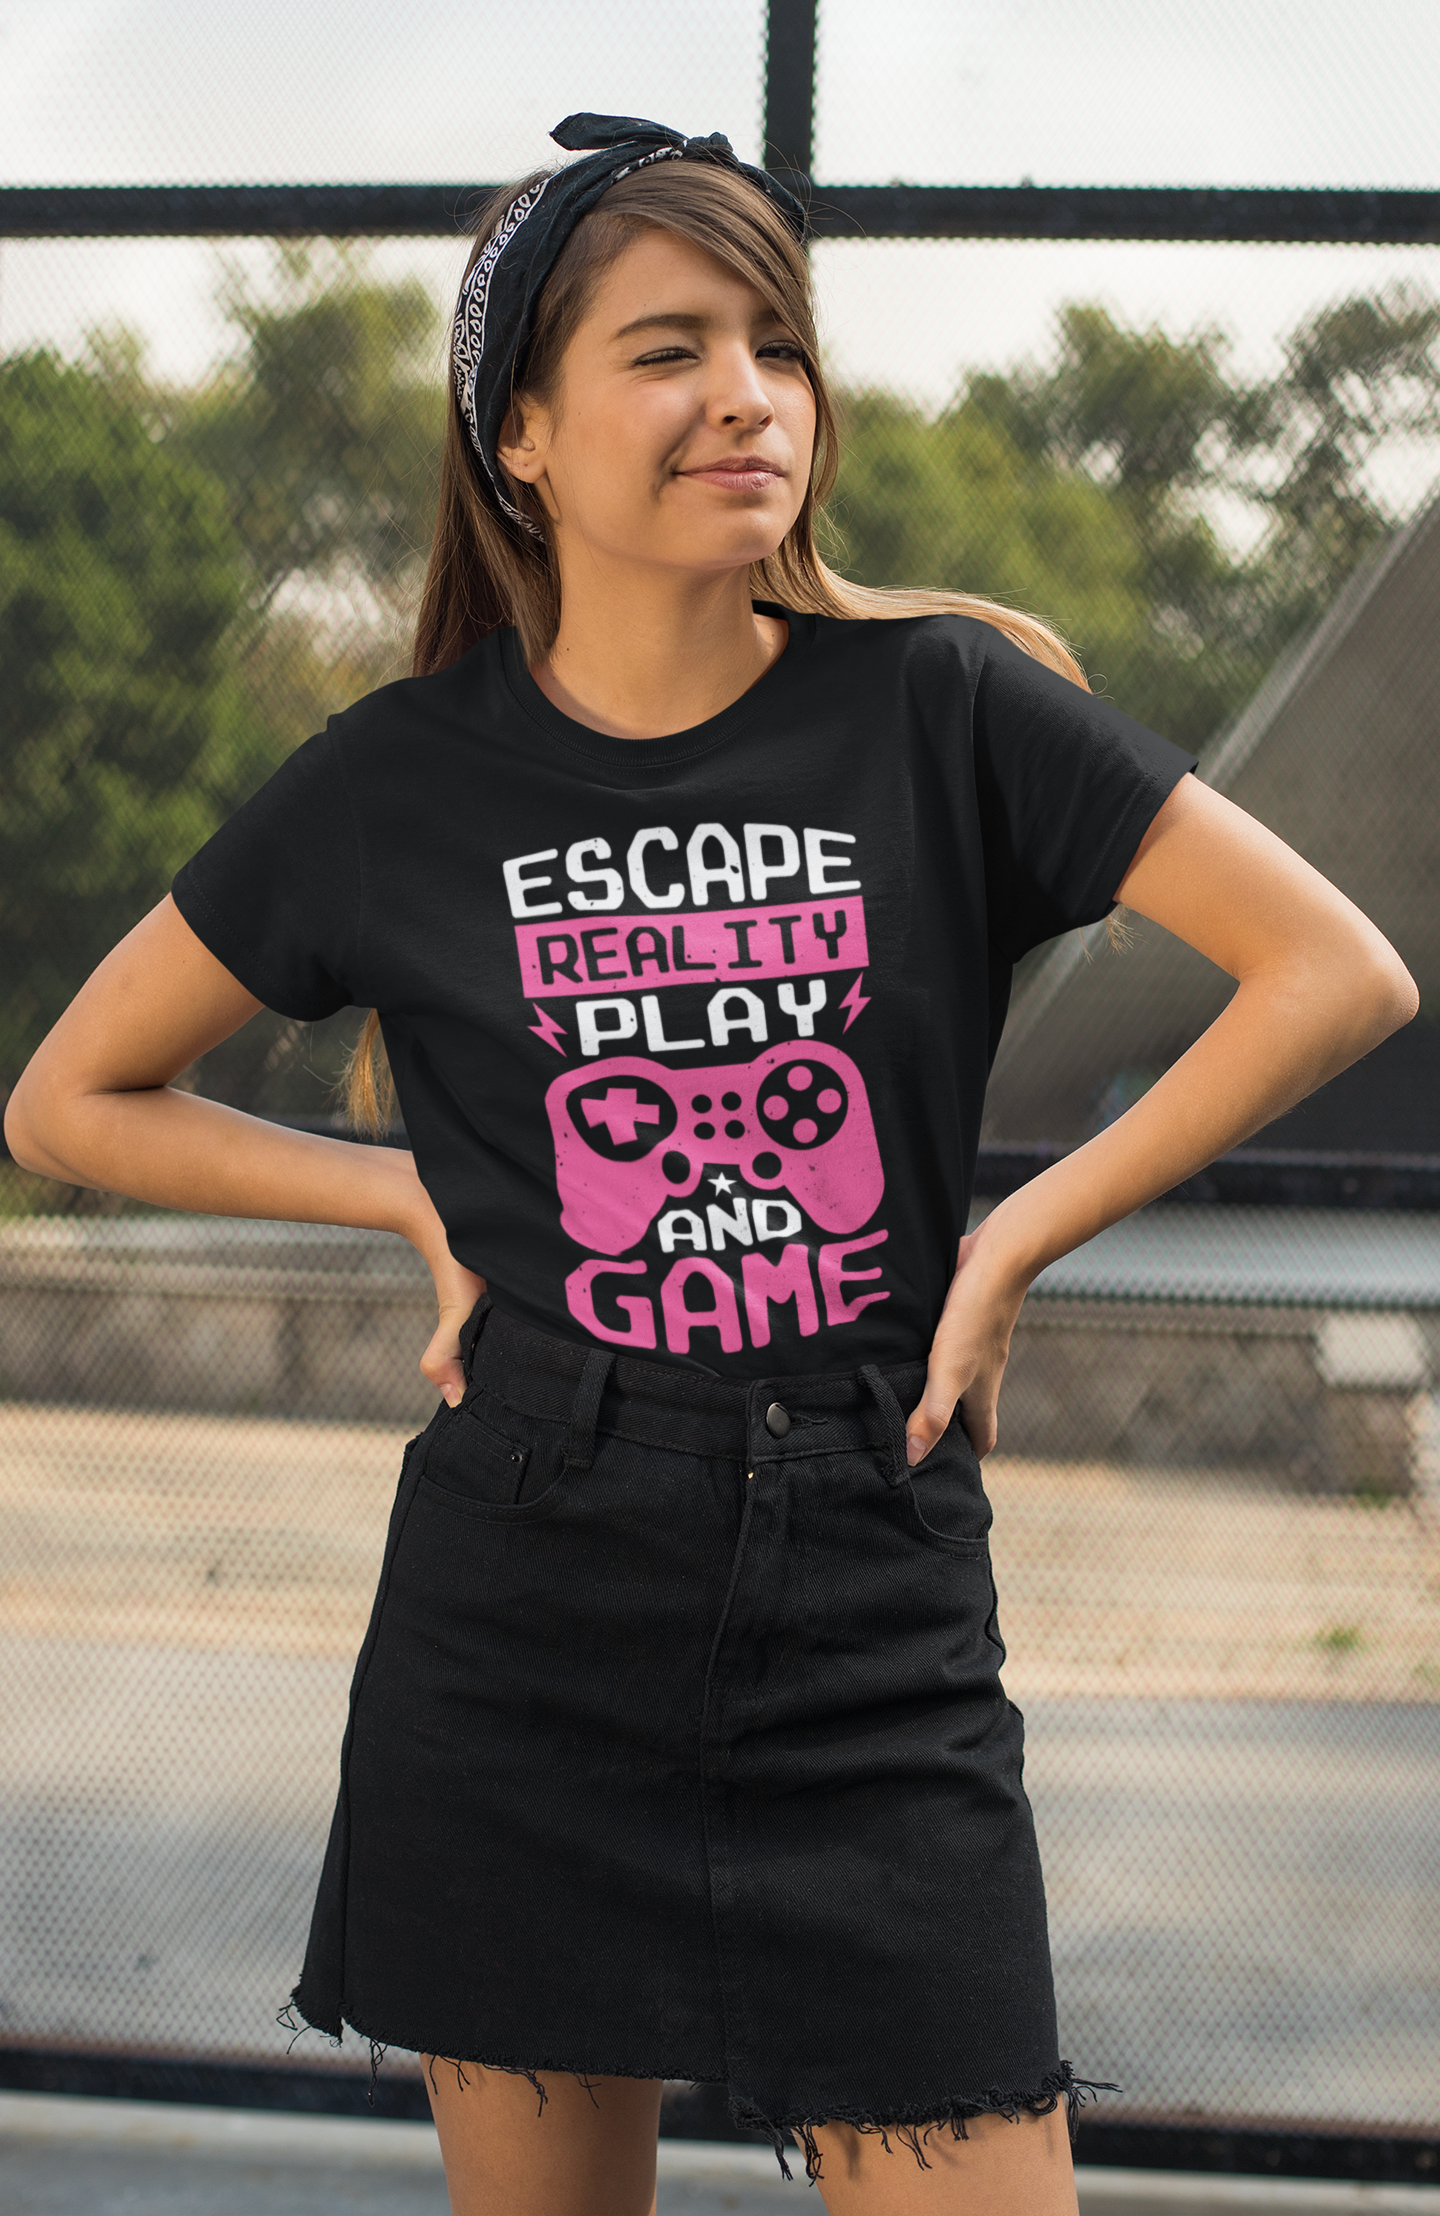 Escape Reality Play Game Round Neck T-Shirt for Women